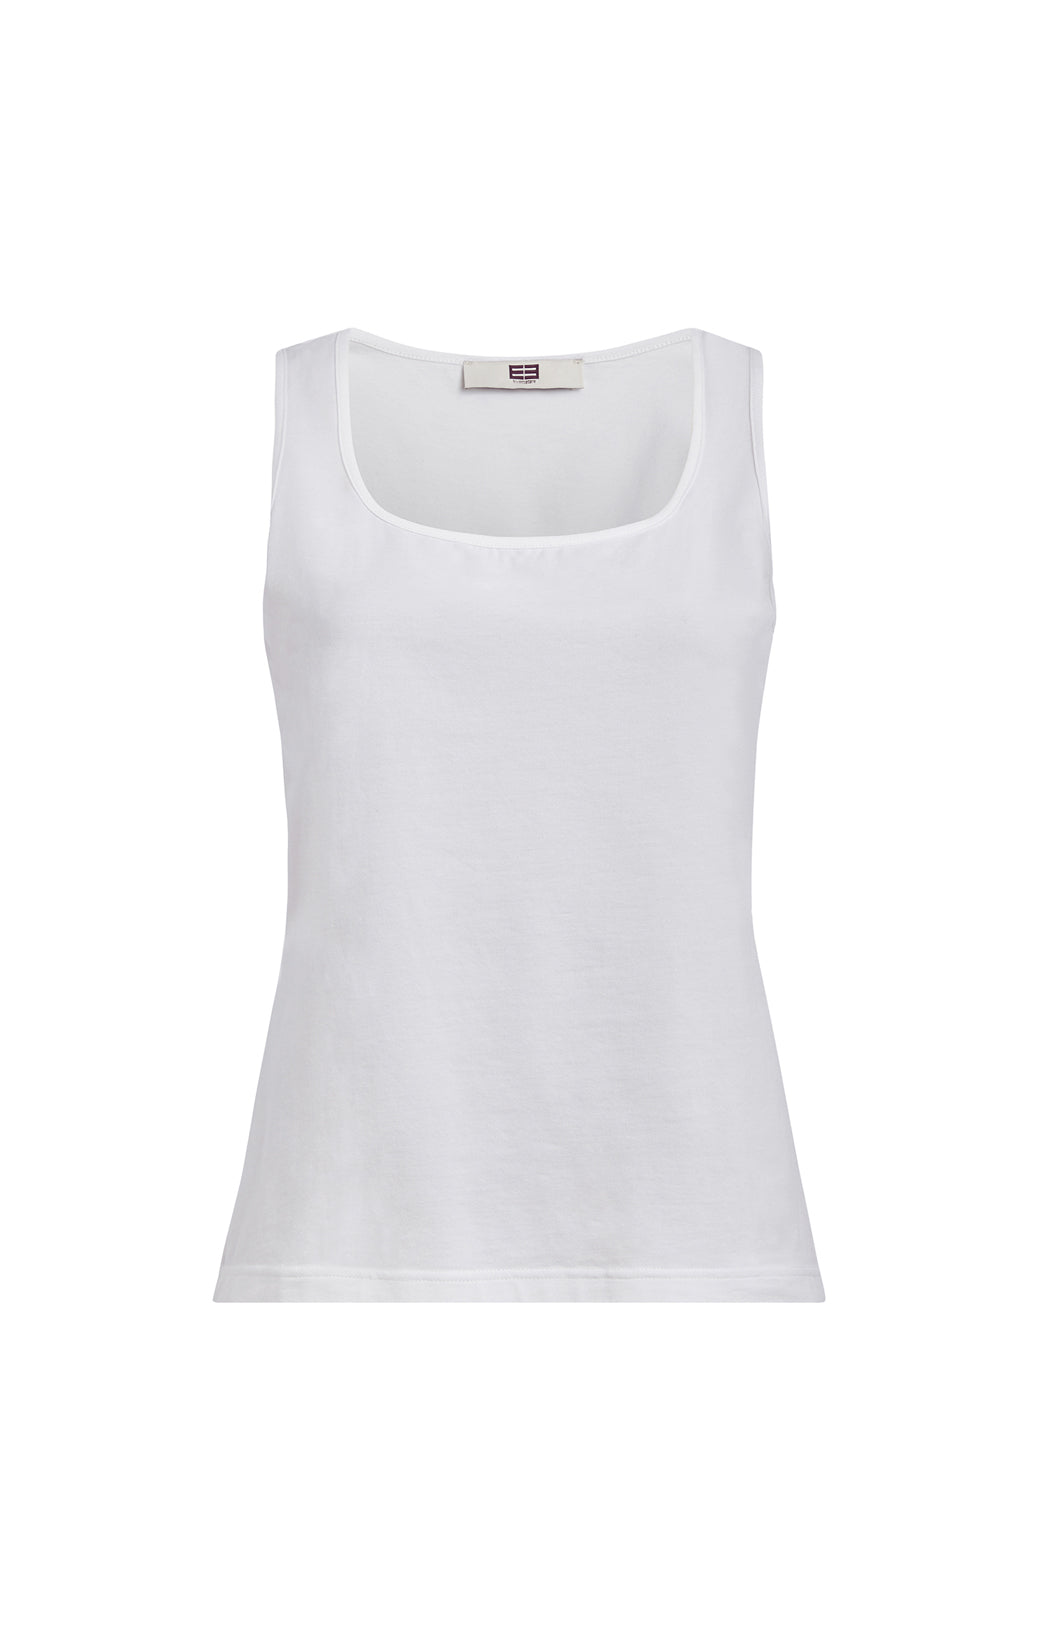 Laguna-Nvy - Stretch Jersey Tank Top With Portrait Neck - Product Image